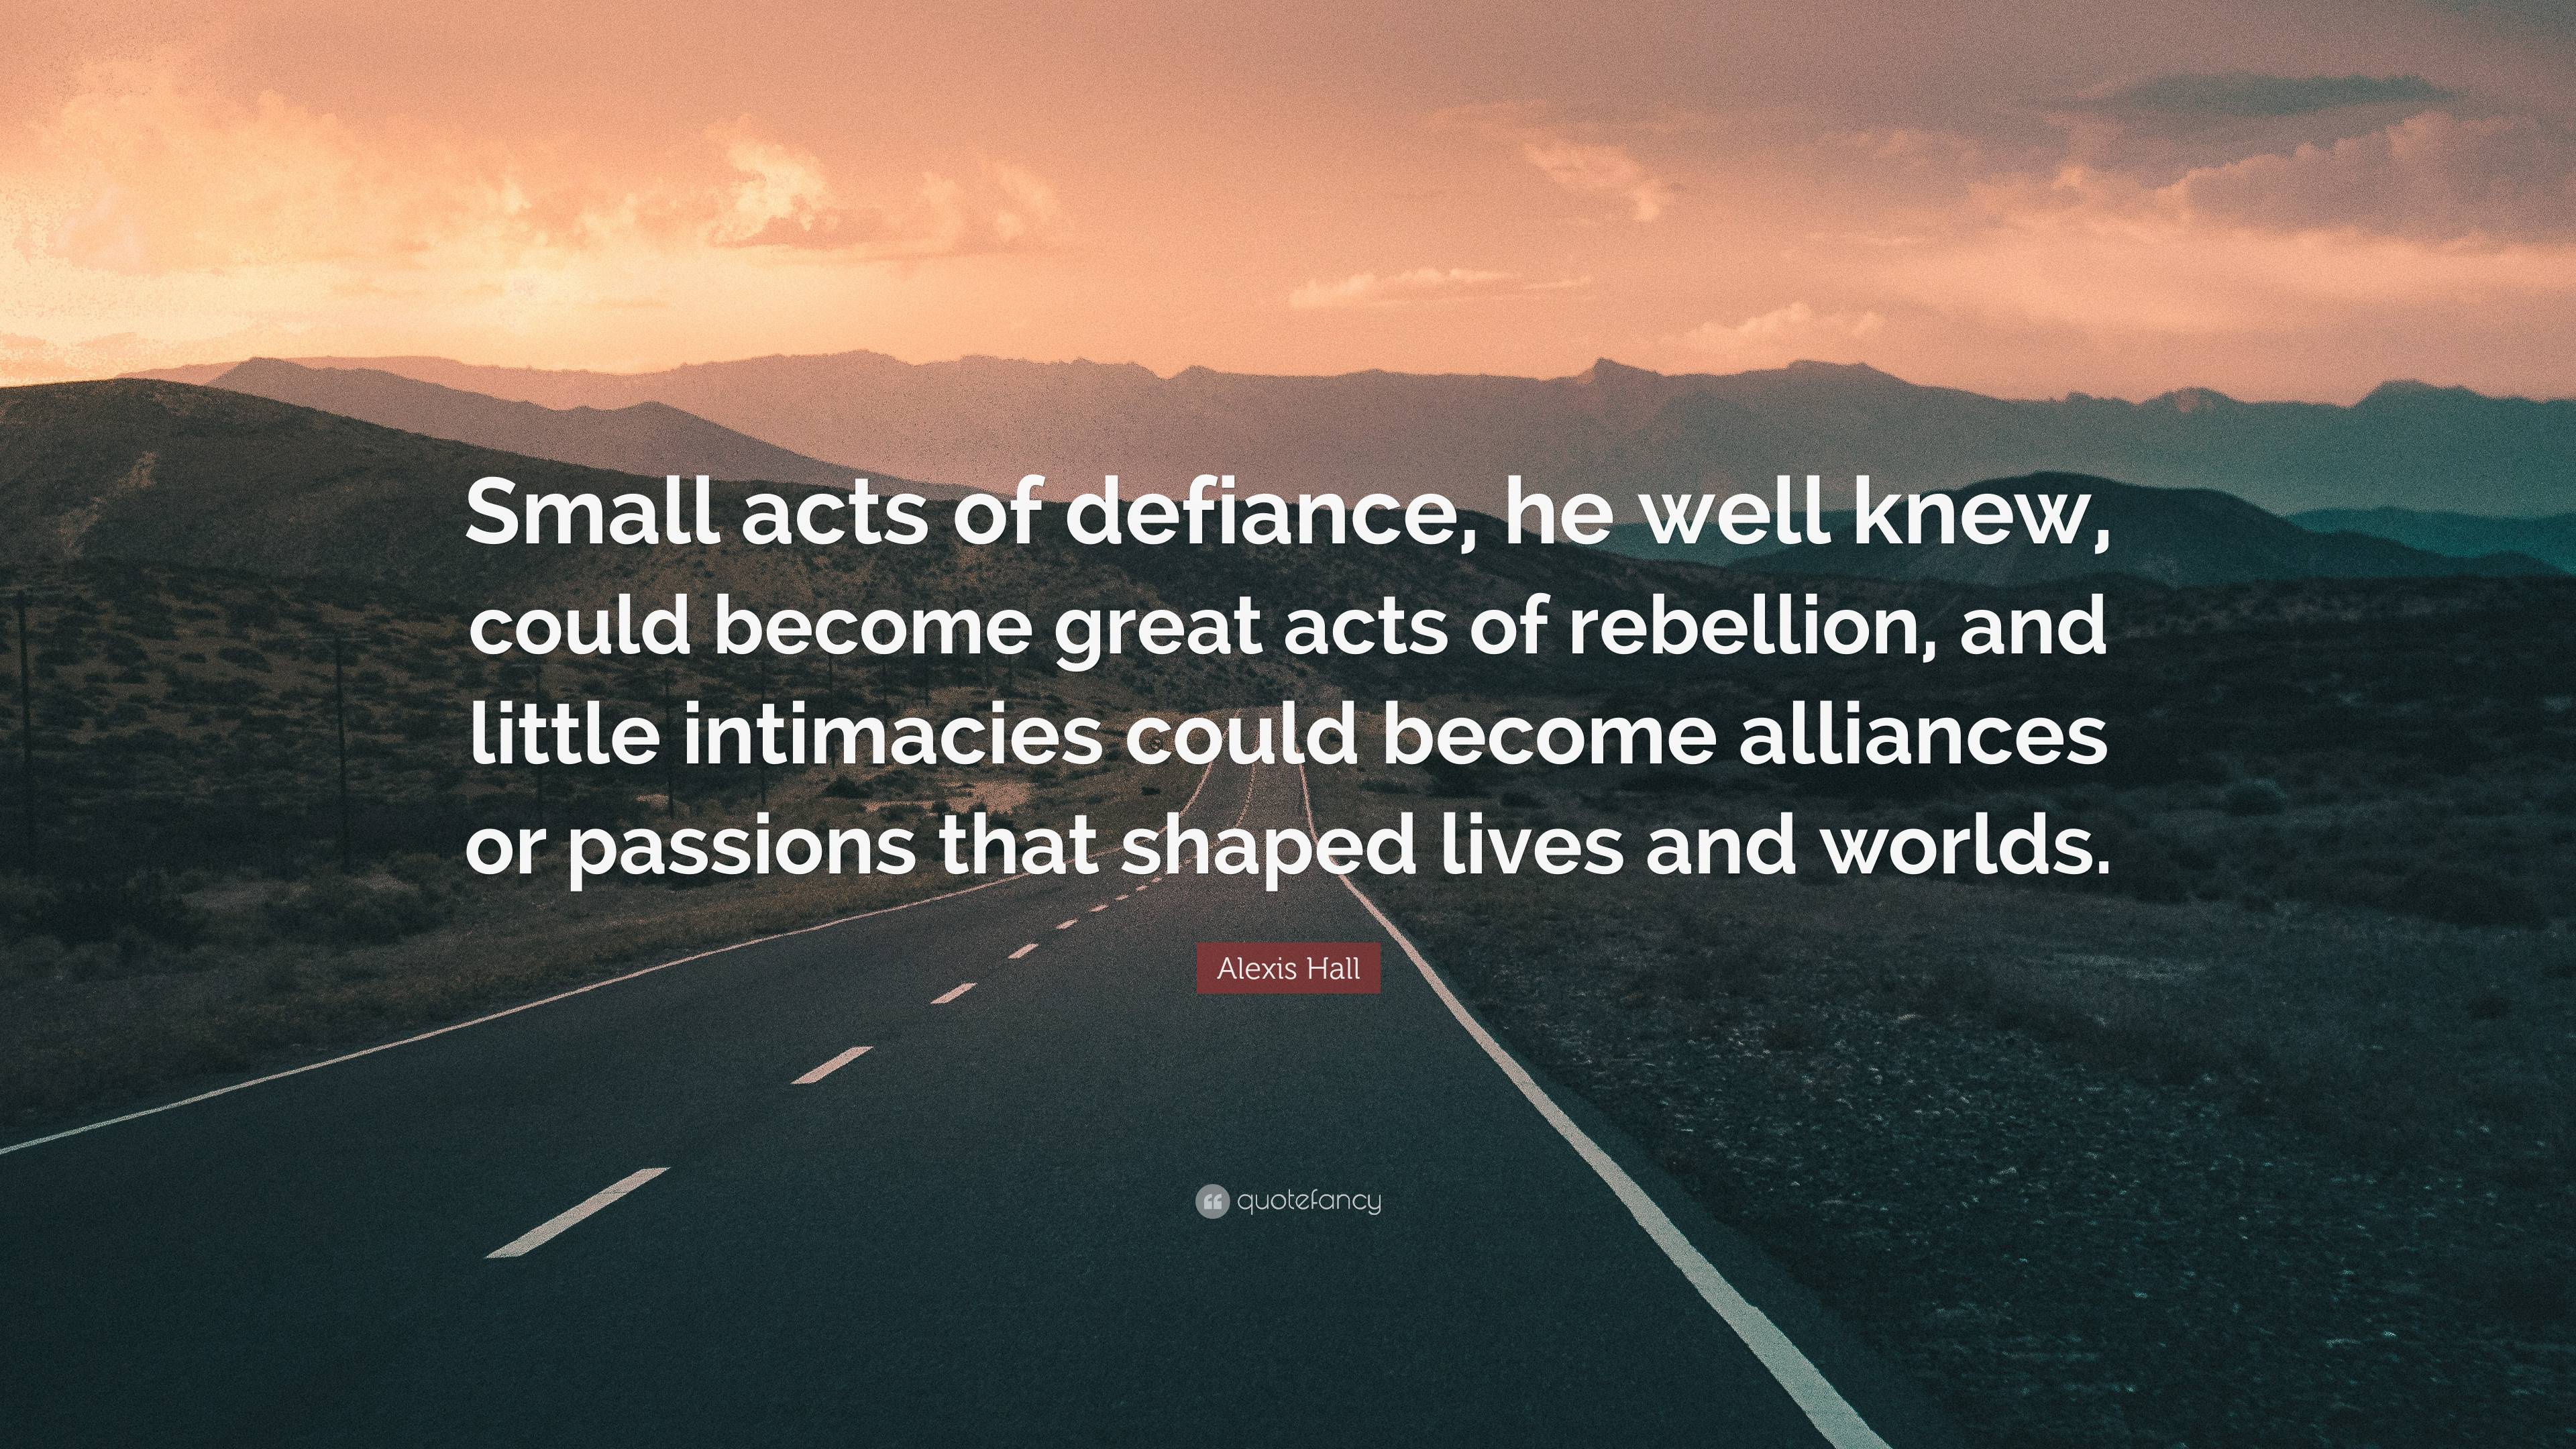 Alexis Hall Quote “small Acts Of Defiance He Well Knew Could Become Great Acts Of Rebellion